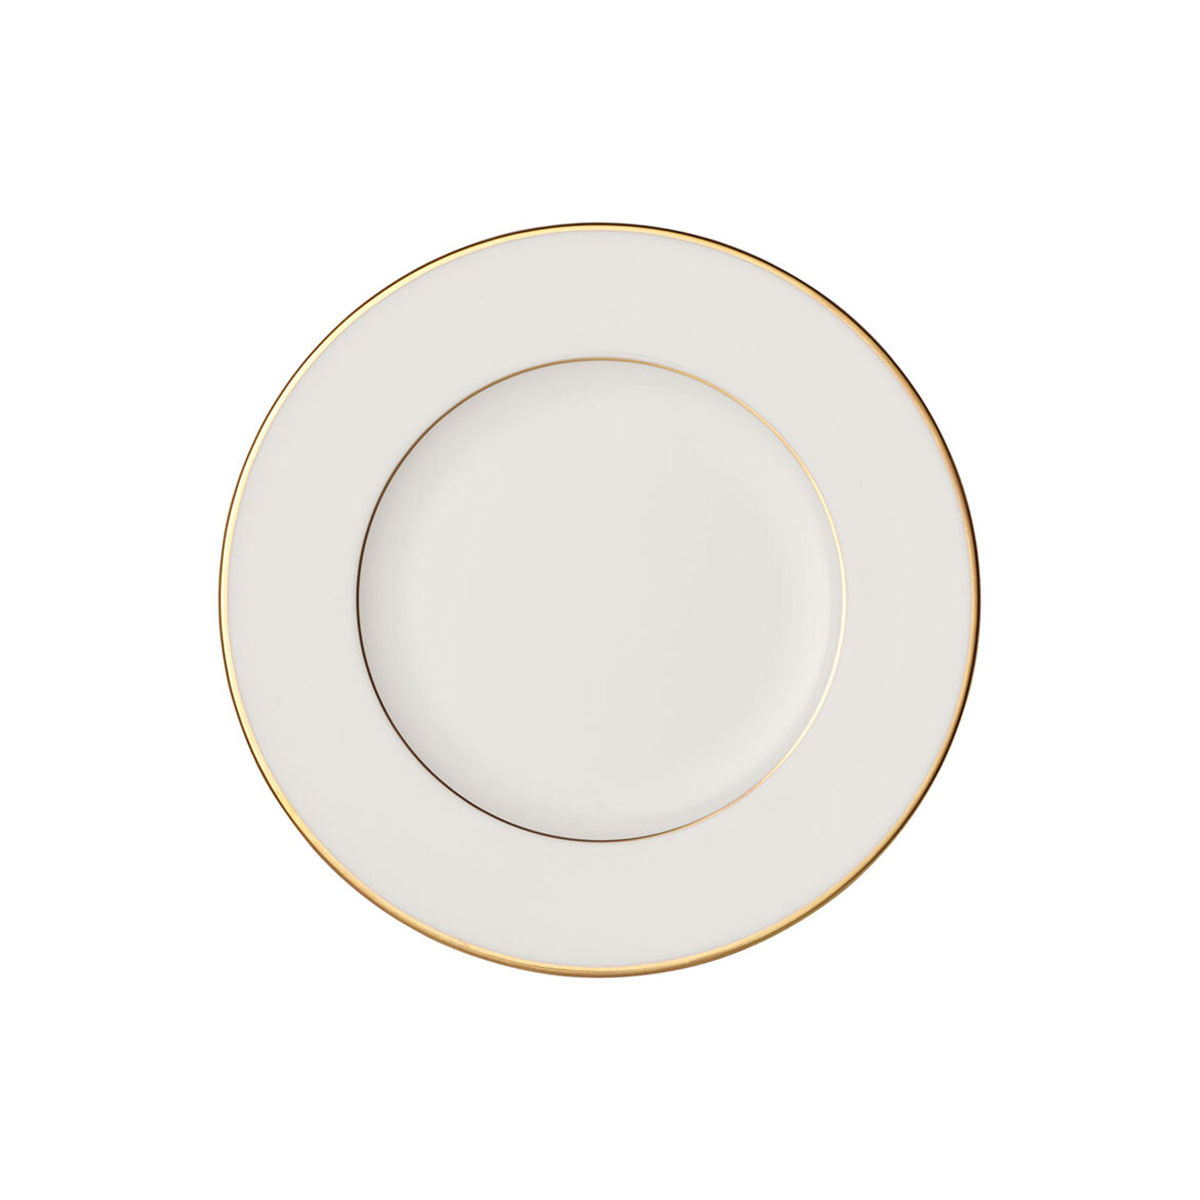 Villeroy and Boch Anmut Gold Bread and Butter Plate